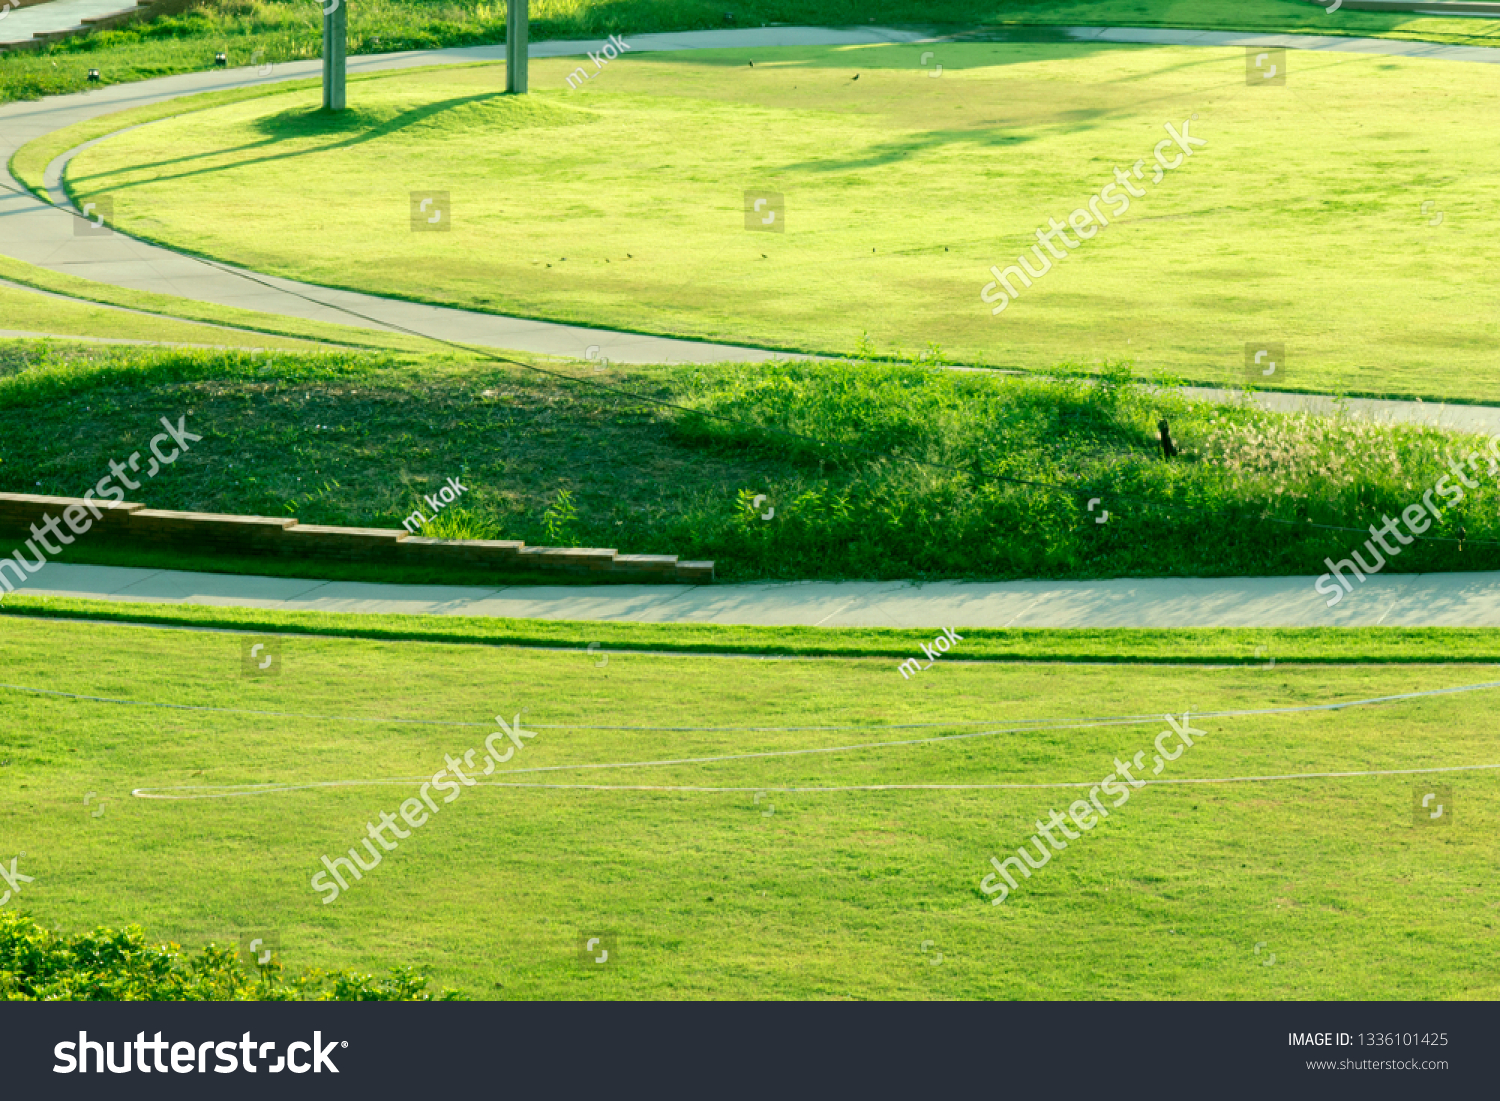 Outdoor parks ,Outdoor lawn #1336101425